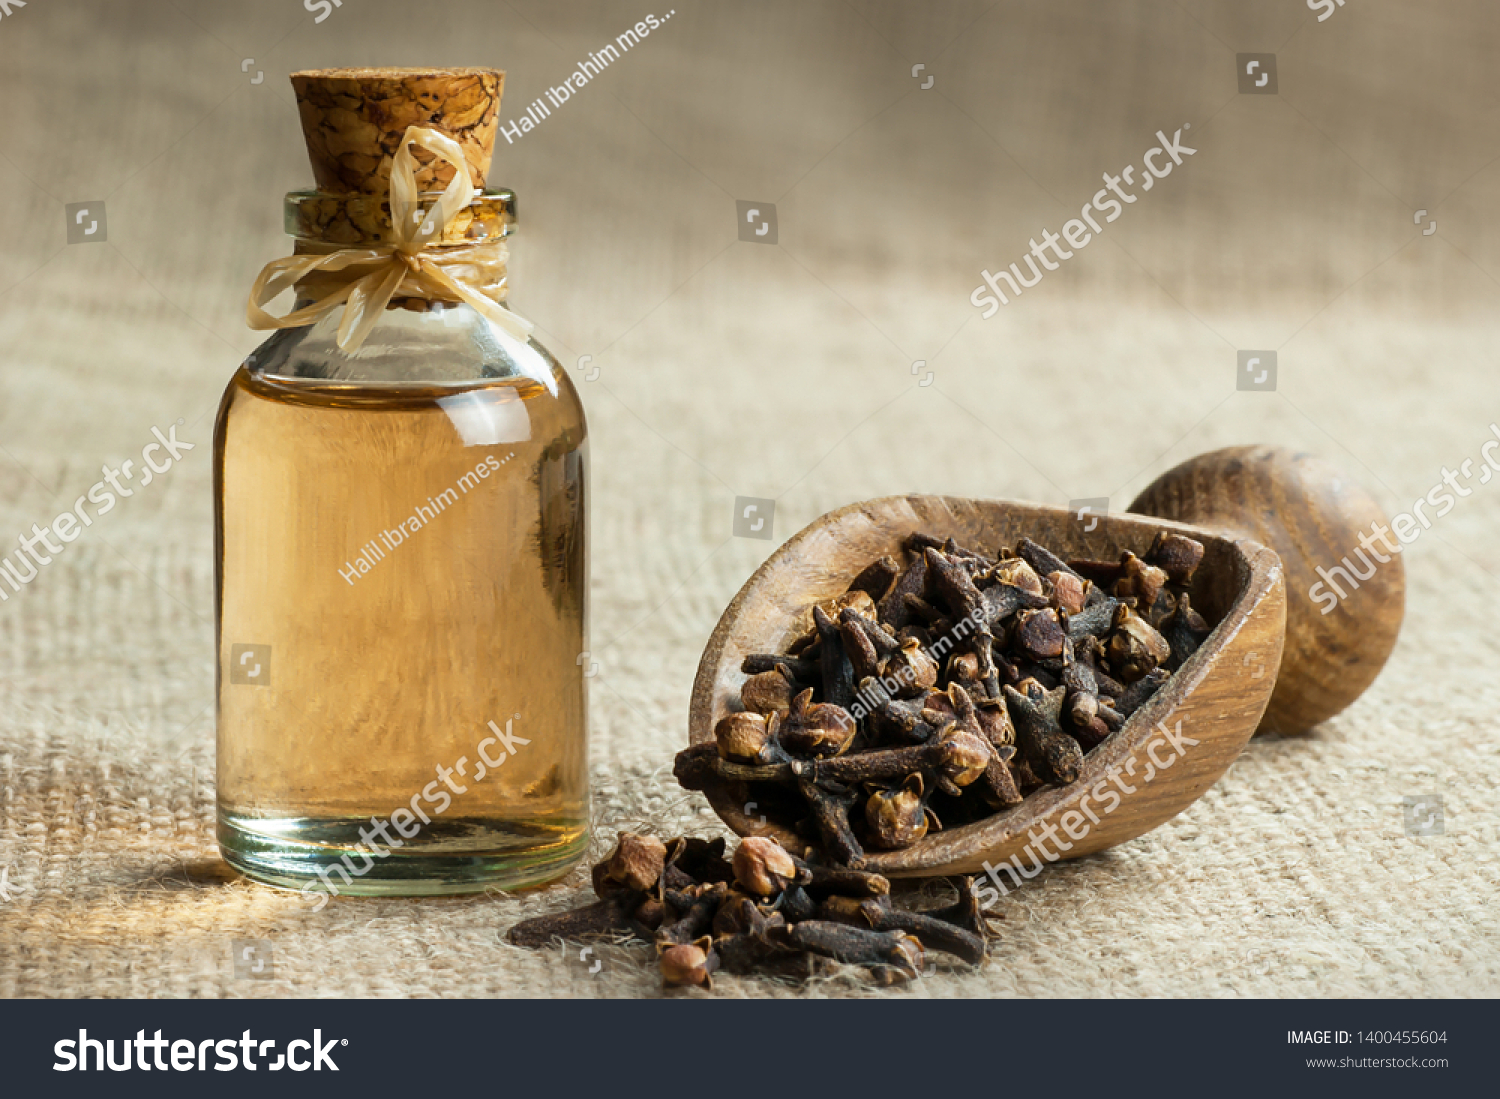 Close up glass bottle of clove oil and cloves in wooden shovel on burlap sack. Essential oil of clove rustic style background spice concept  #1400455604